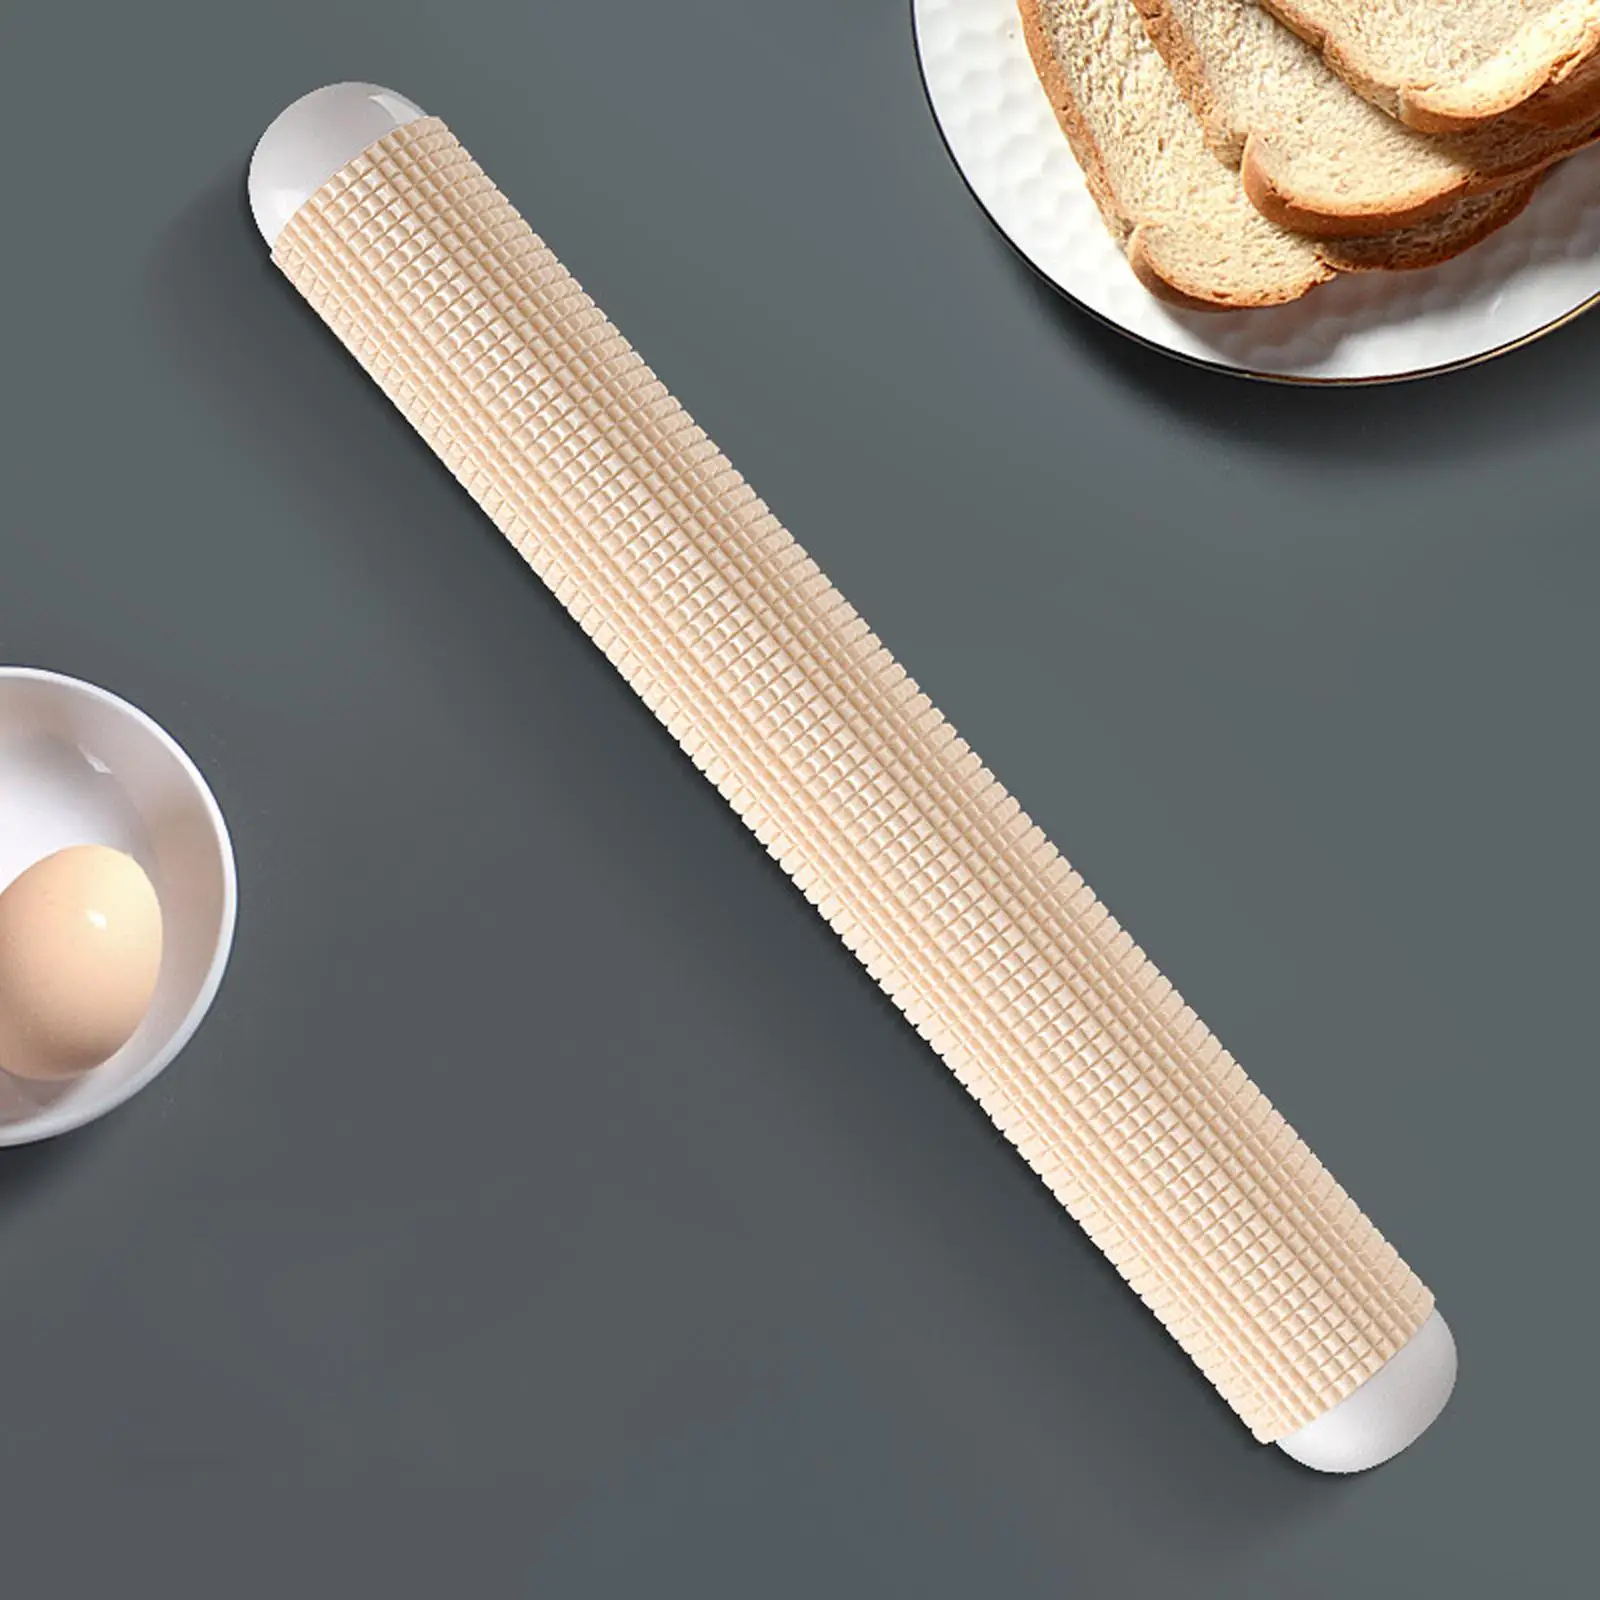 Professional Rolling Pin Non-Stick Cooking Tool Utensil Premium Dough Roller for Home Bread Baking Kitchen Pastry